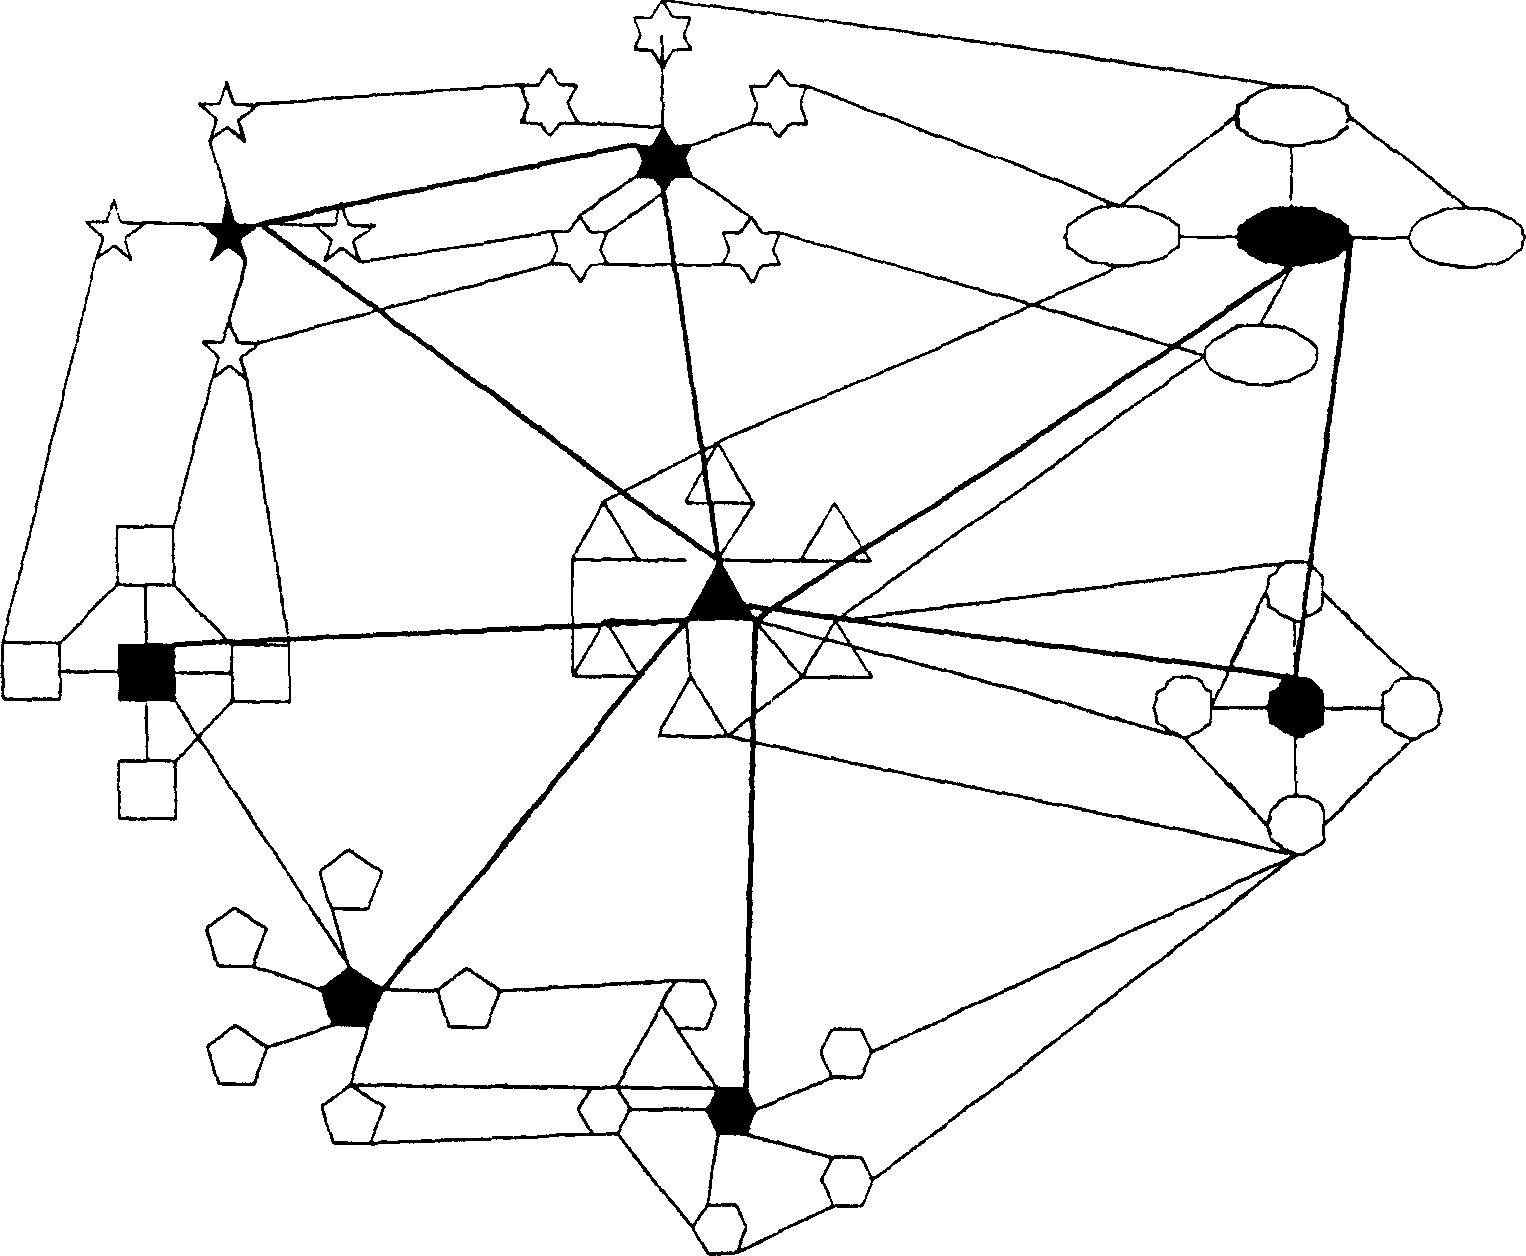 Hierchical visual structure of generating semantic network